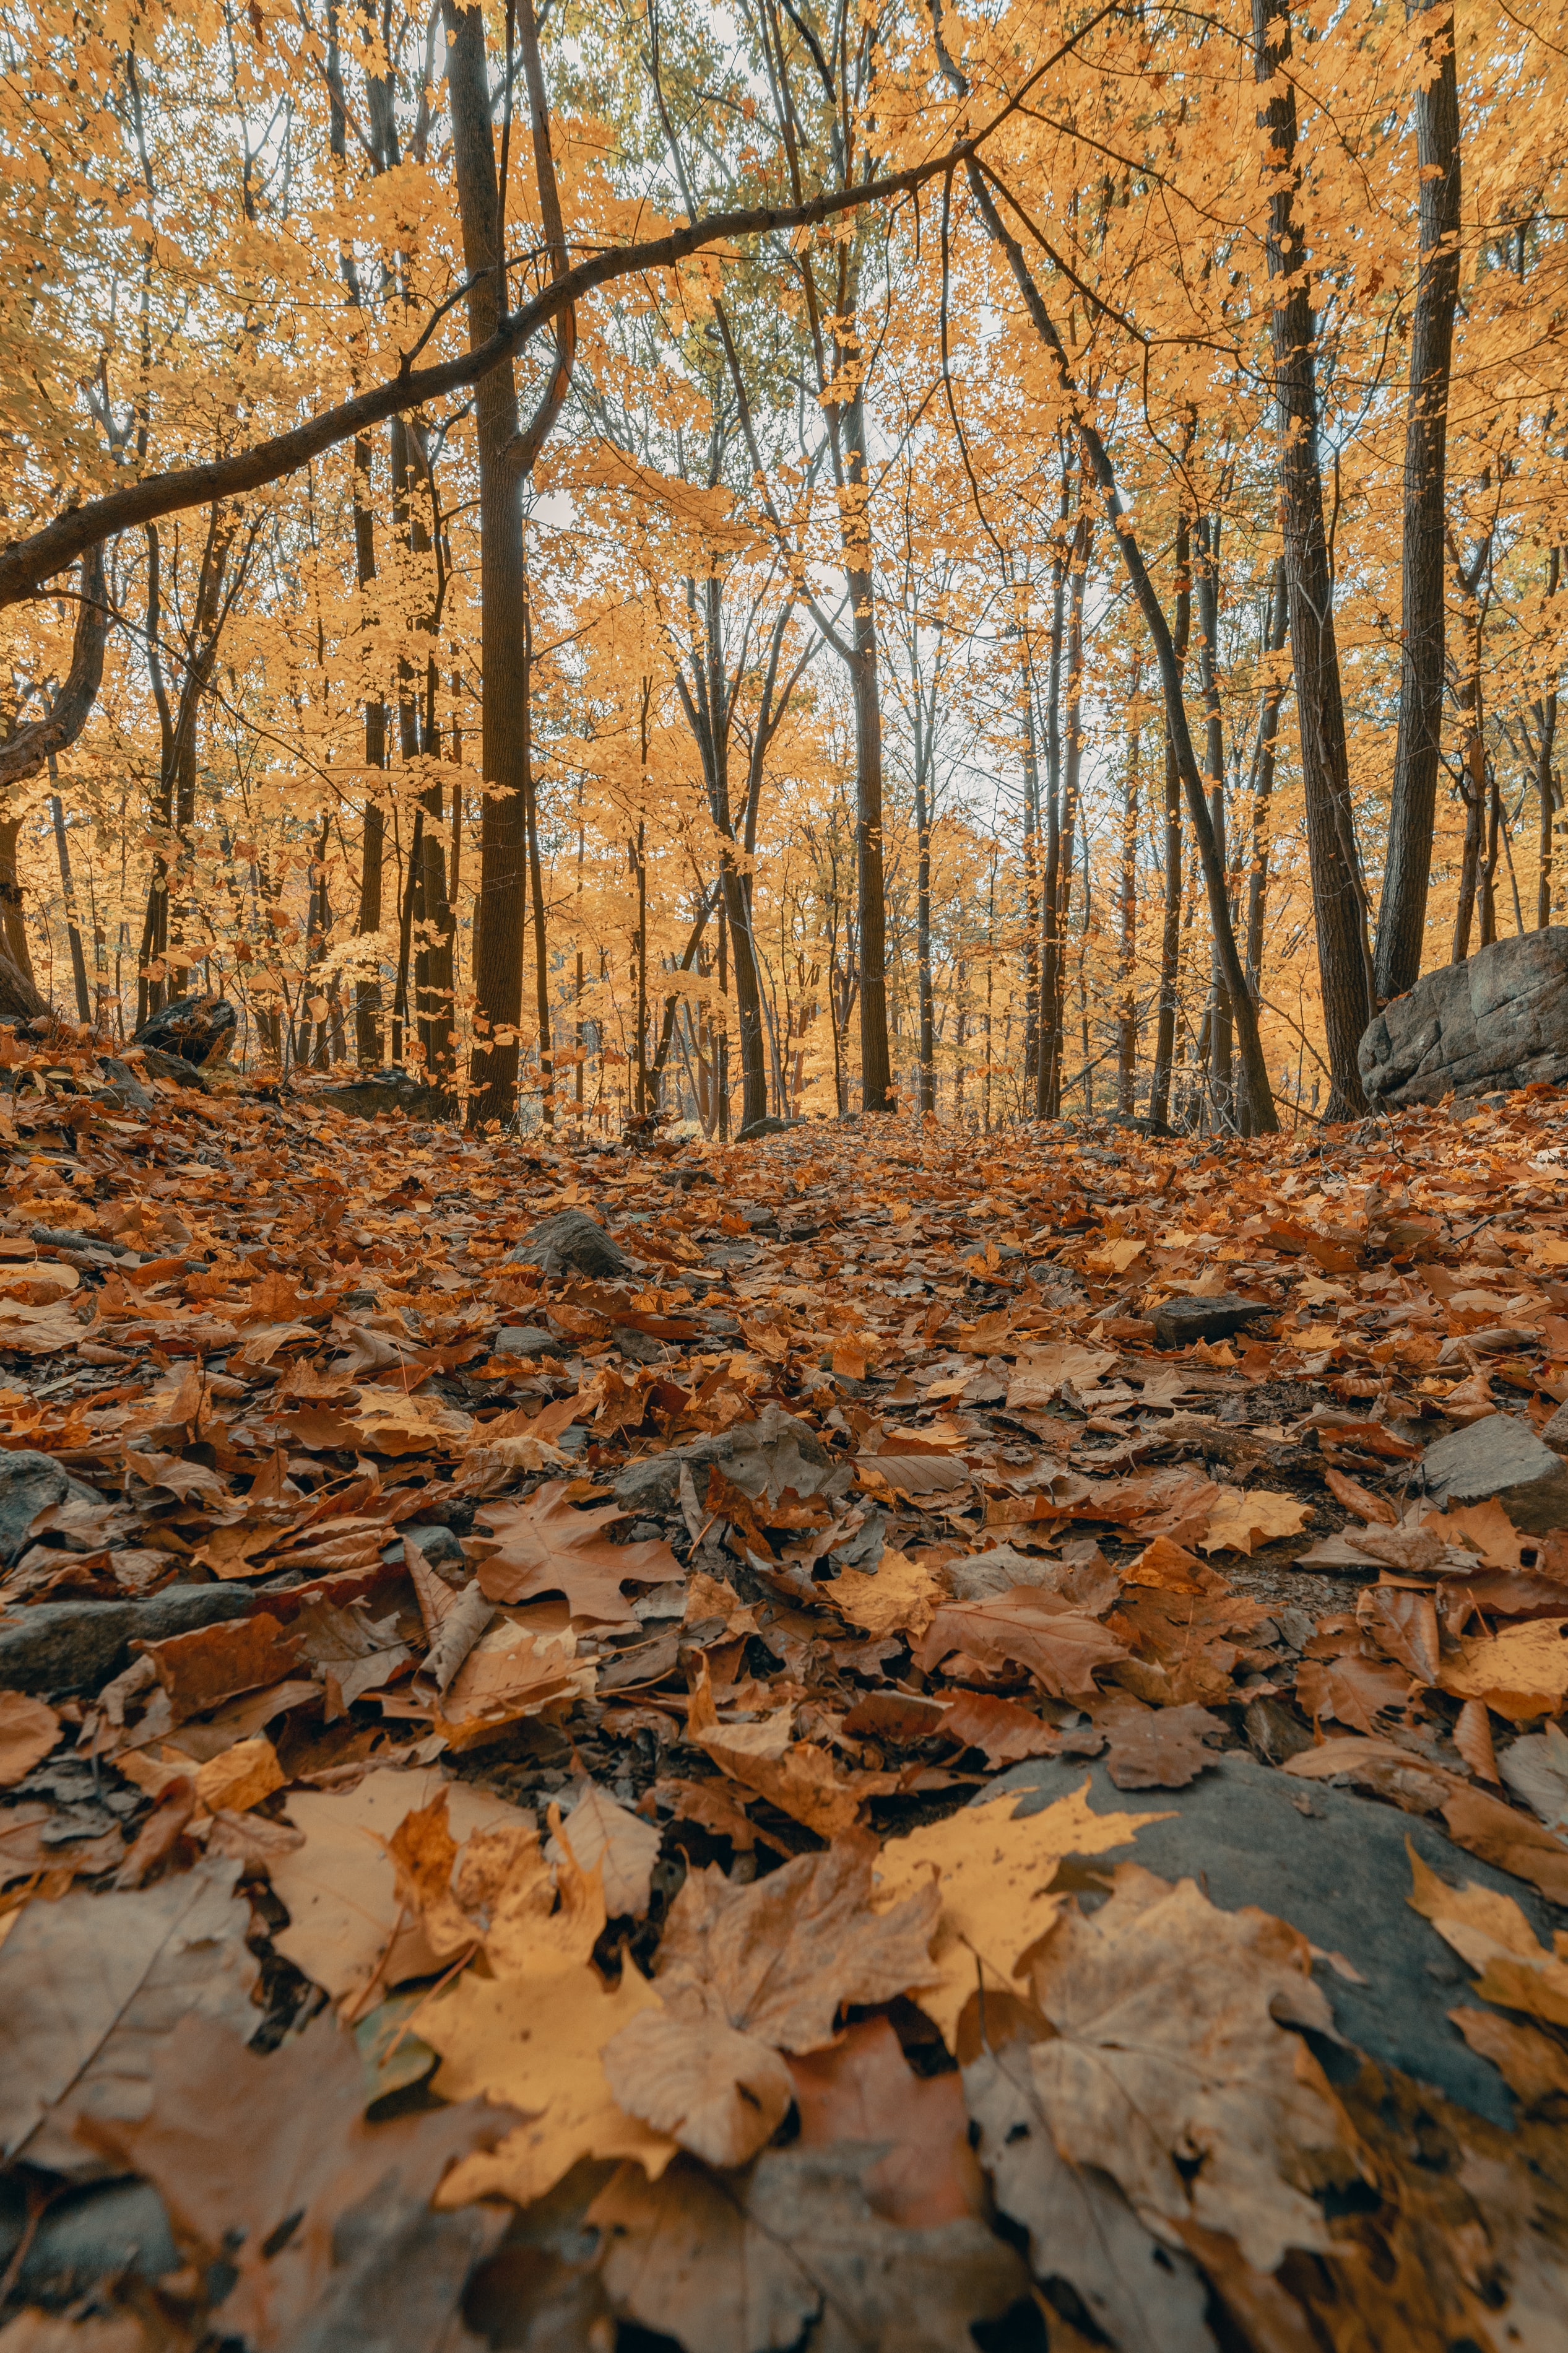 forest, autumn, fallen leaves, nature, trees, leaves, fallen foliage